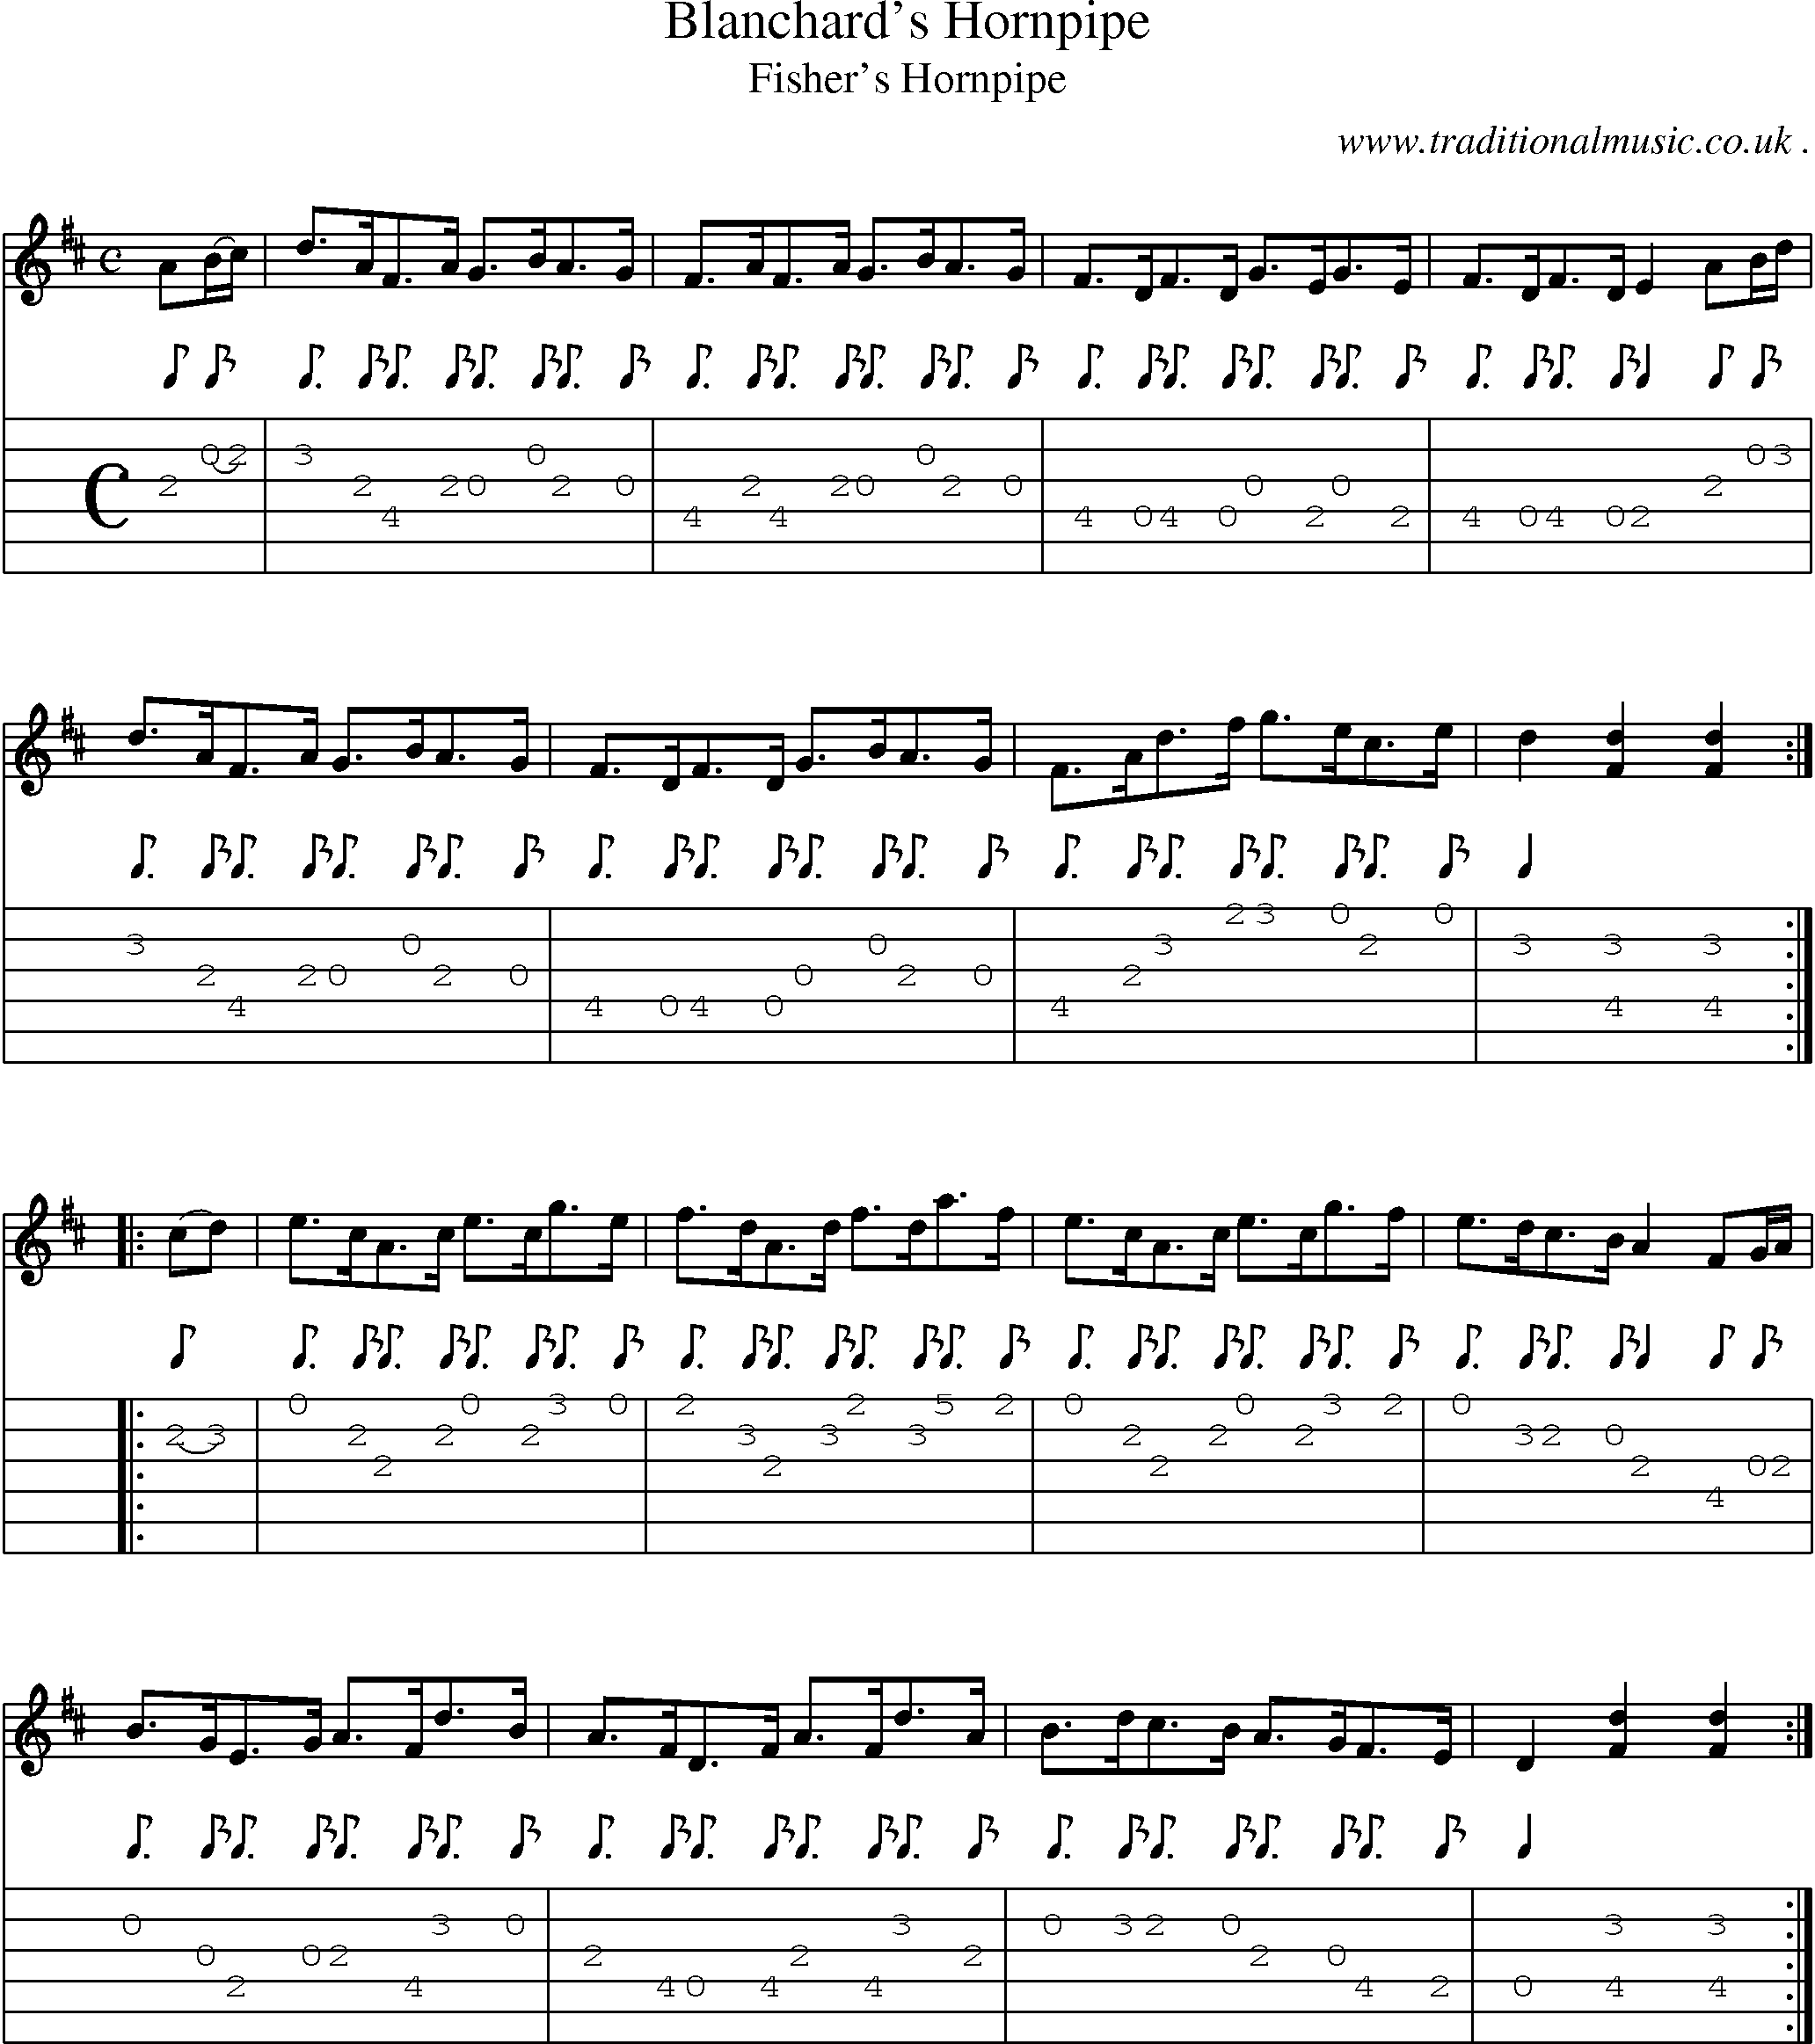 Sheet-music  score, Chords and Guitar Tabs for Blanchards Hornpipe